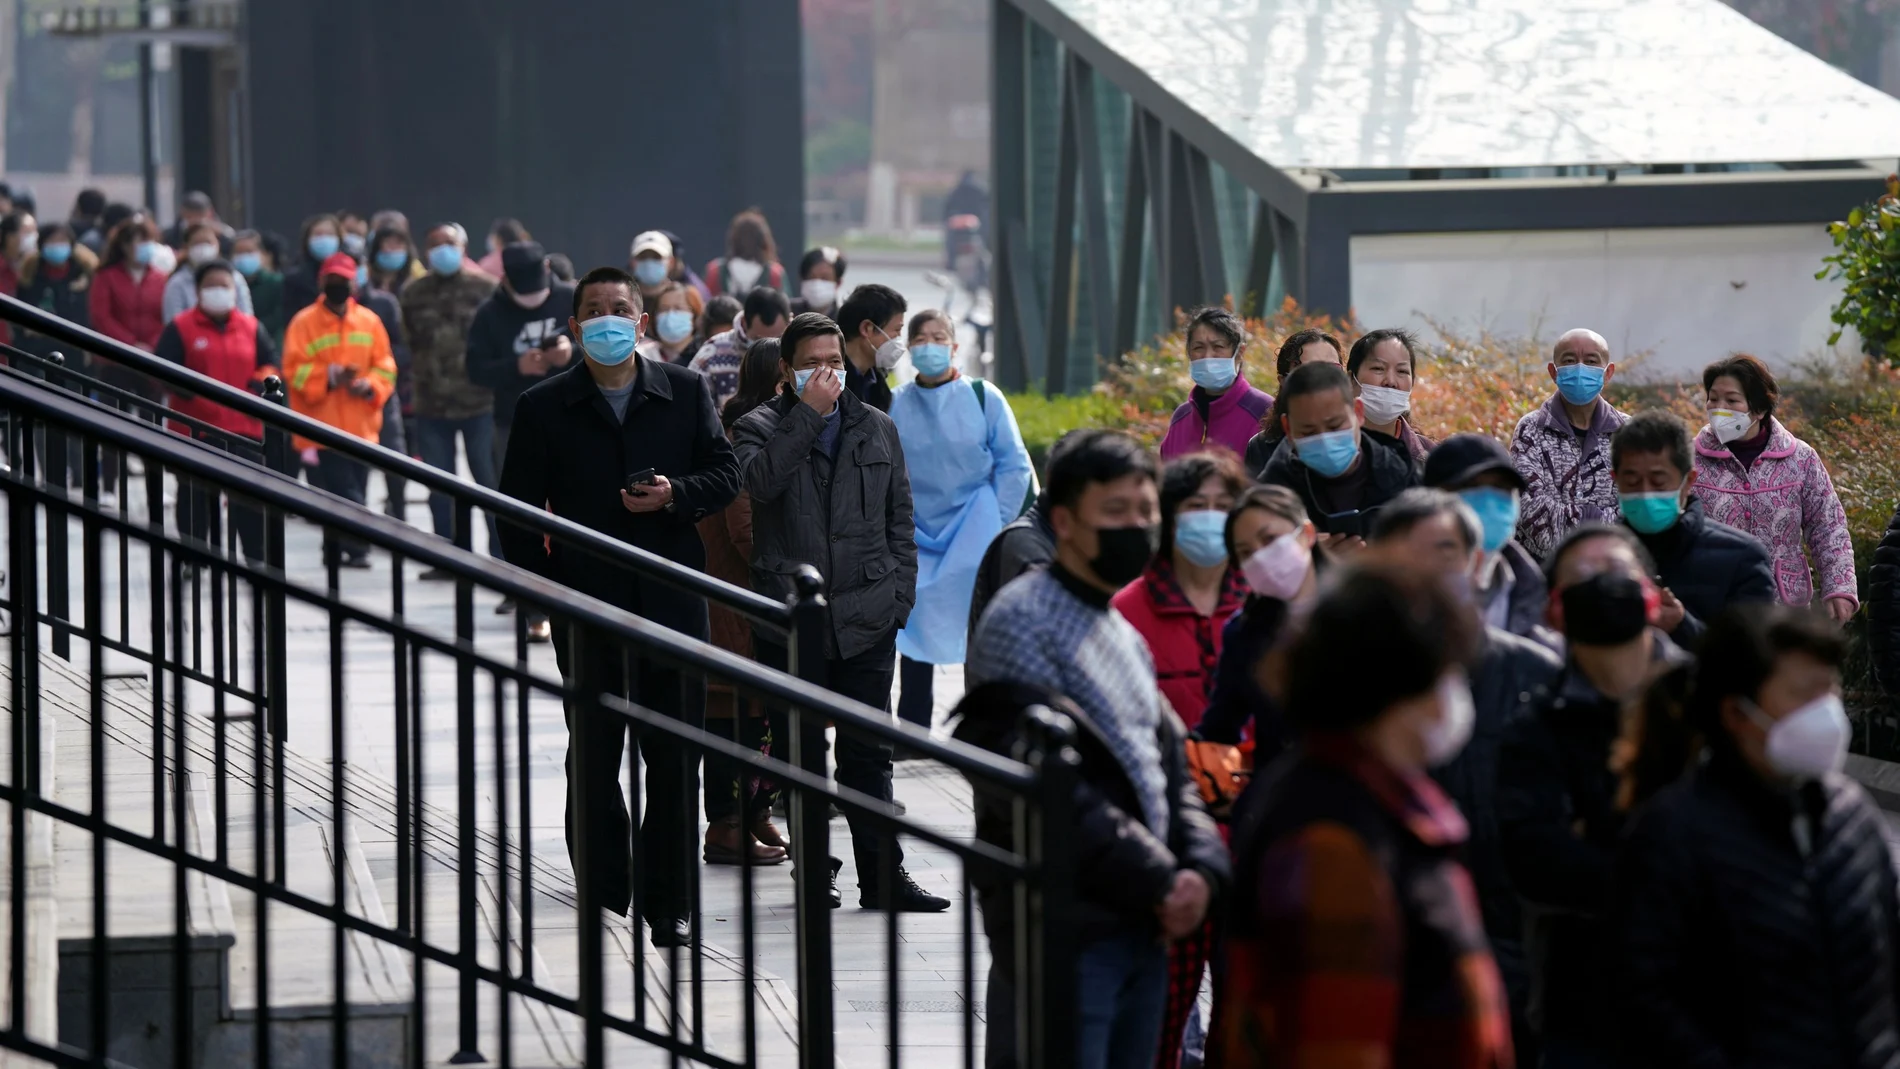 People wearing face masks line up to enter a supermarket in Wuhan